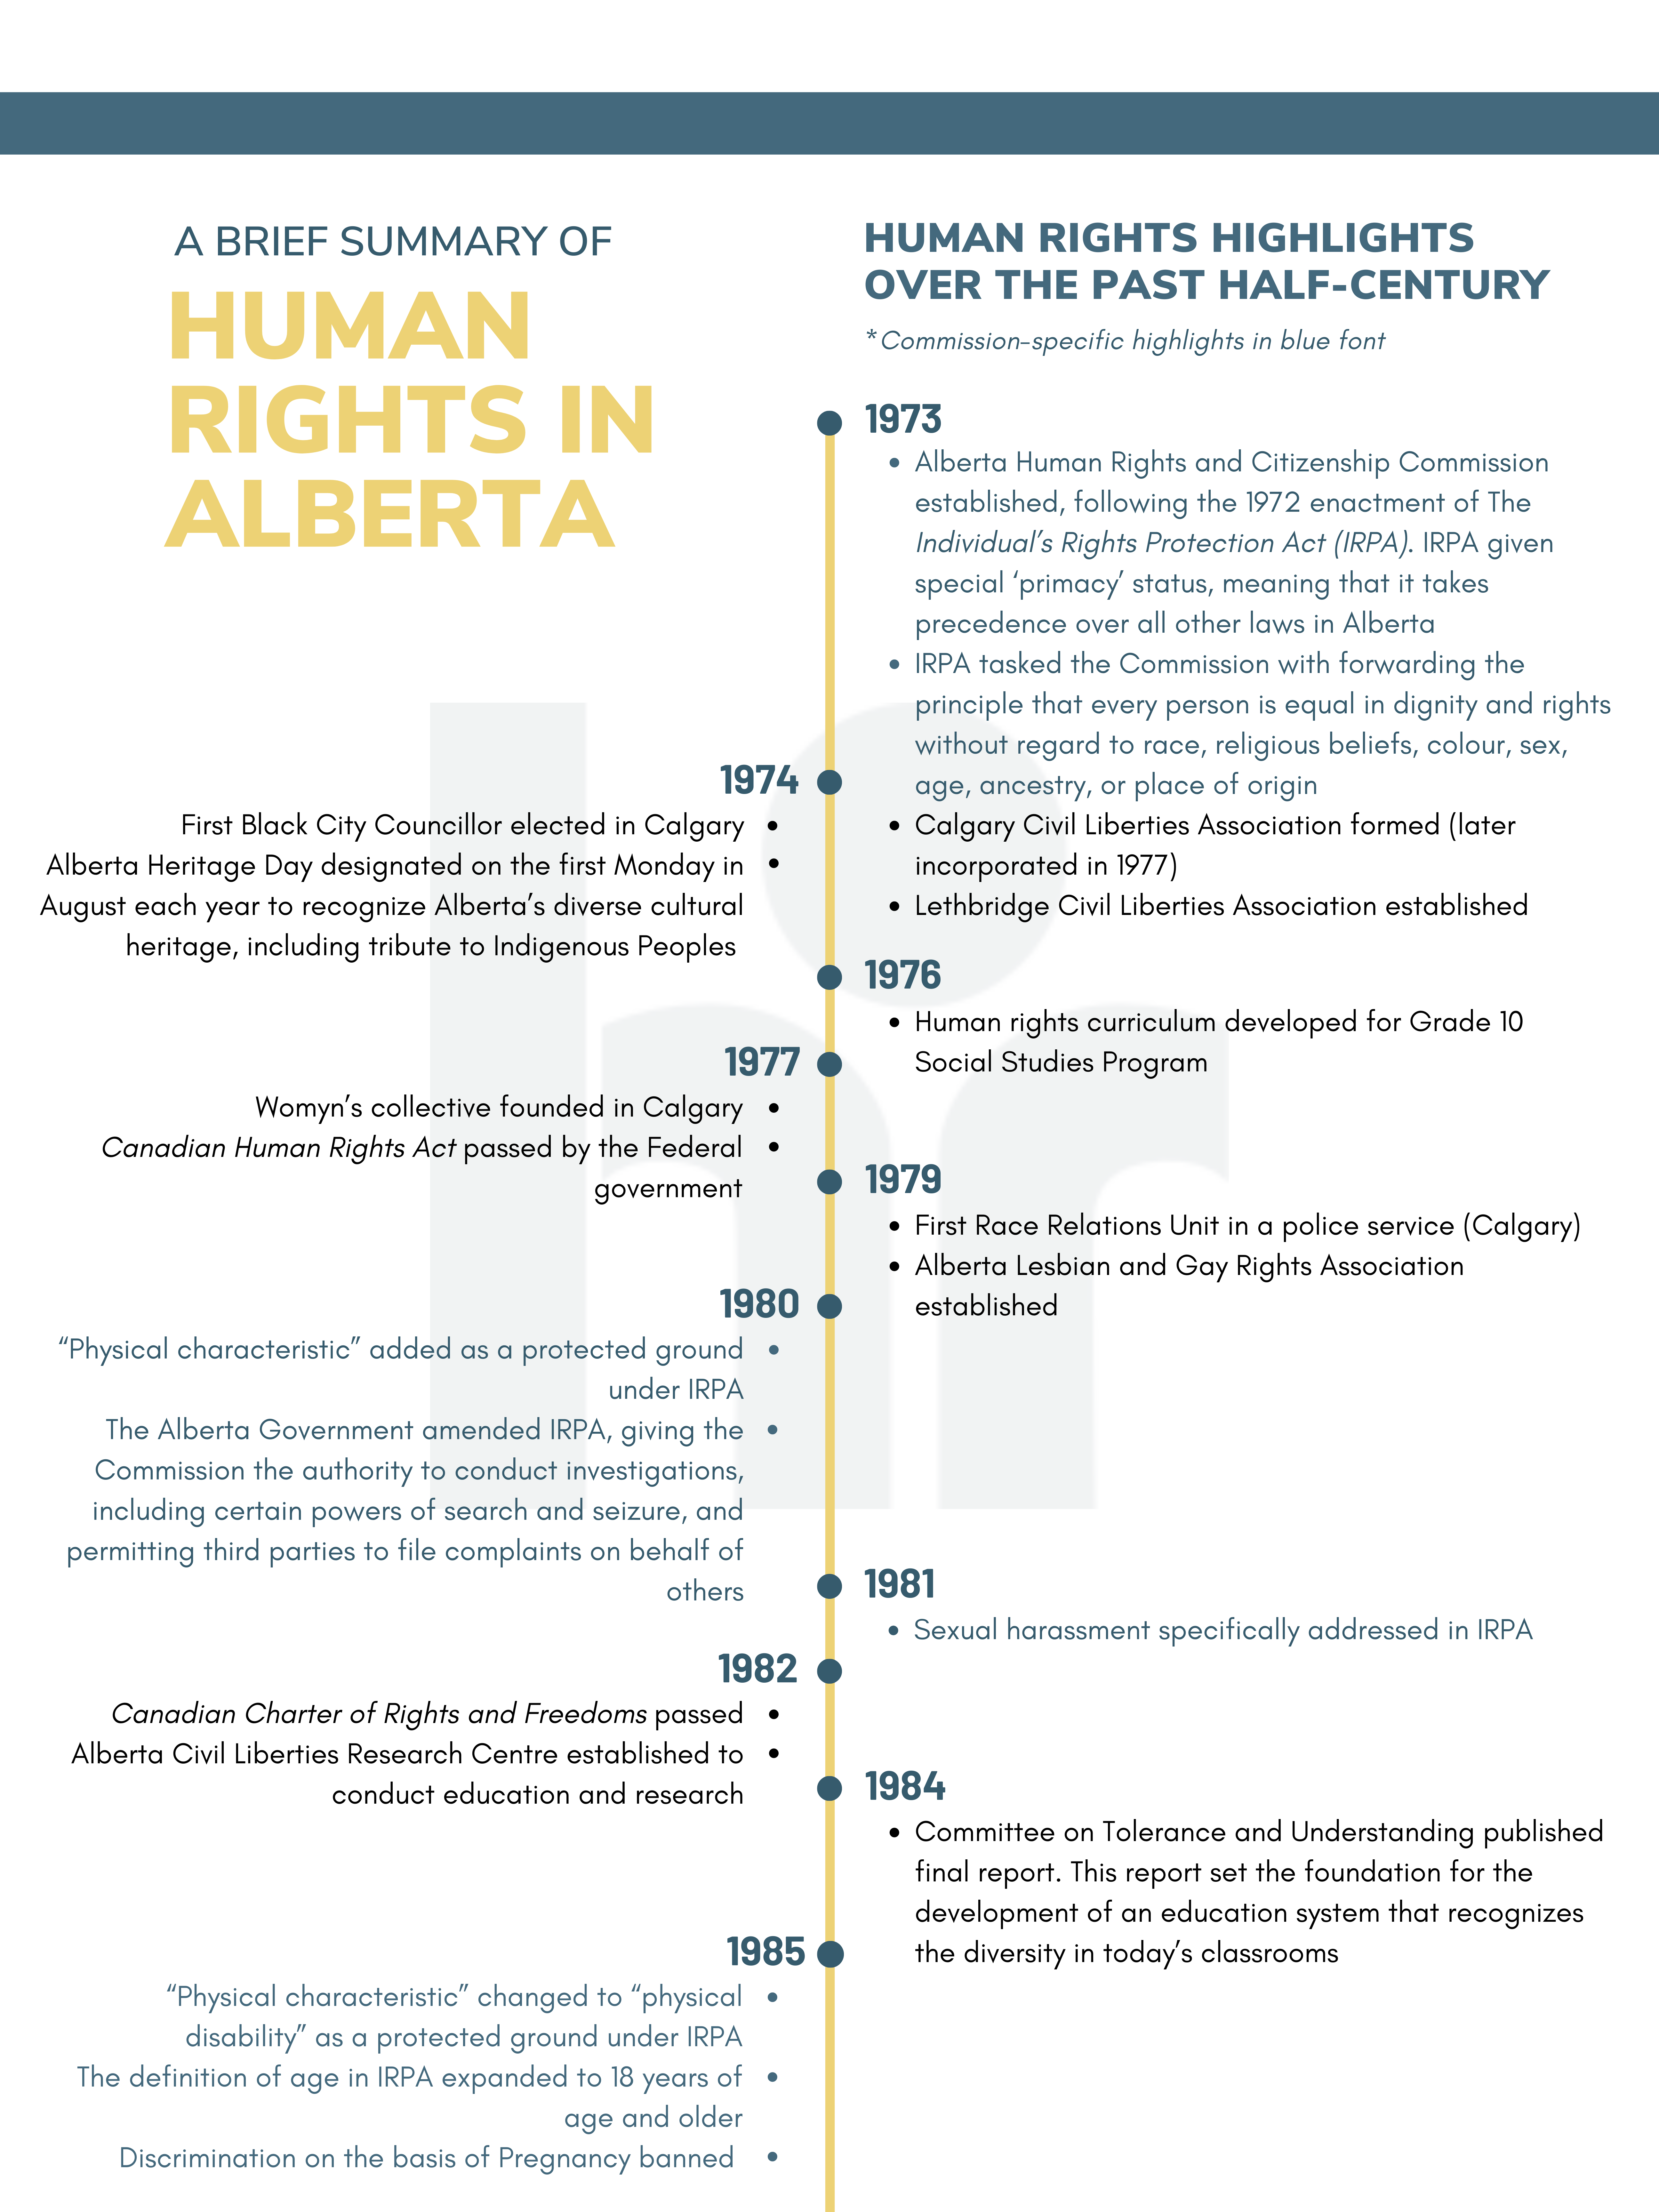 Graphic - Timeline from 1973 to 1985 describing significant events in Alberta's human rights history.